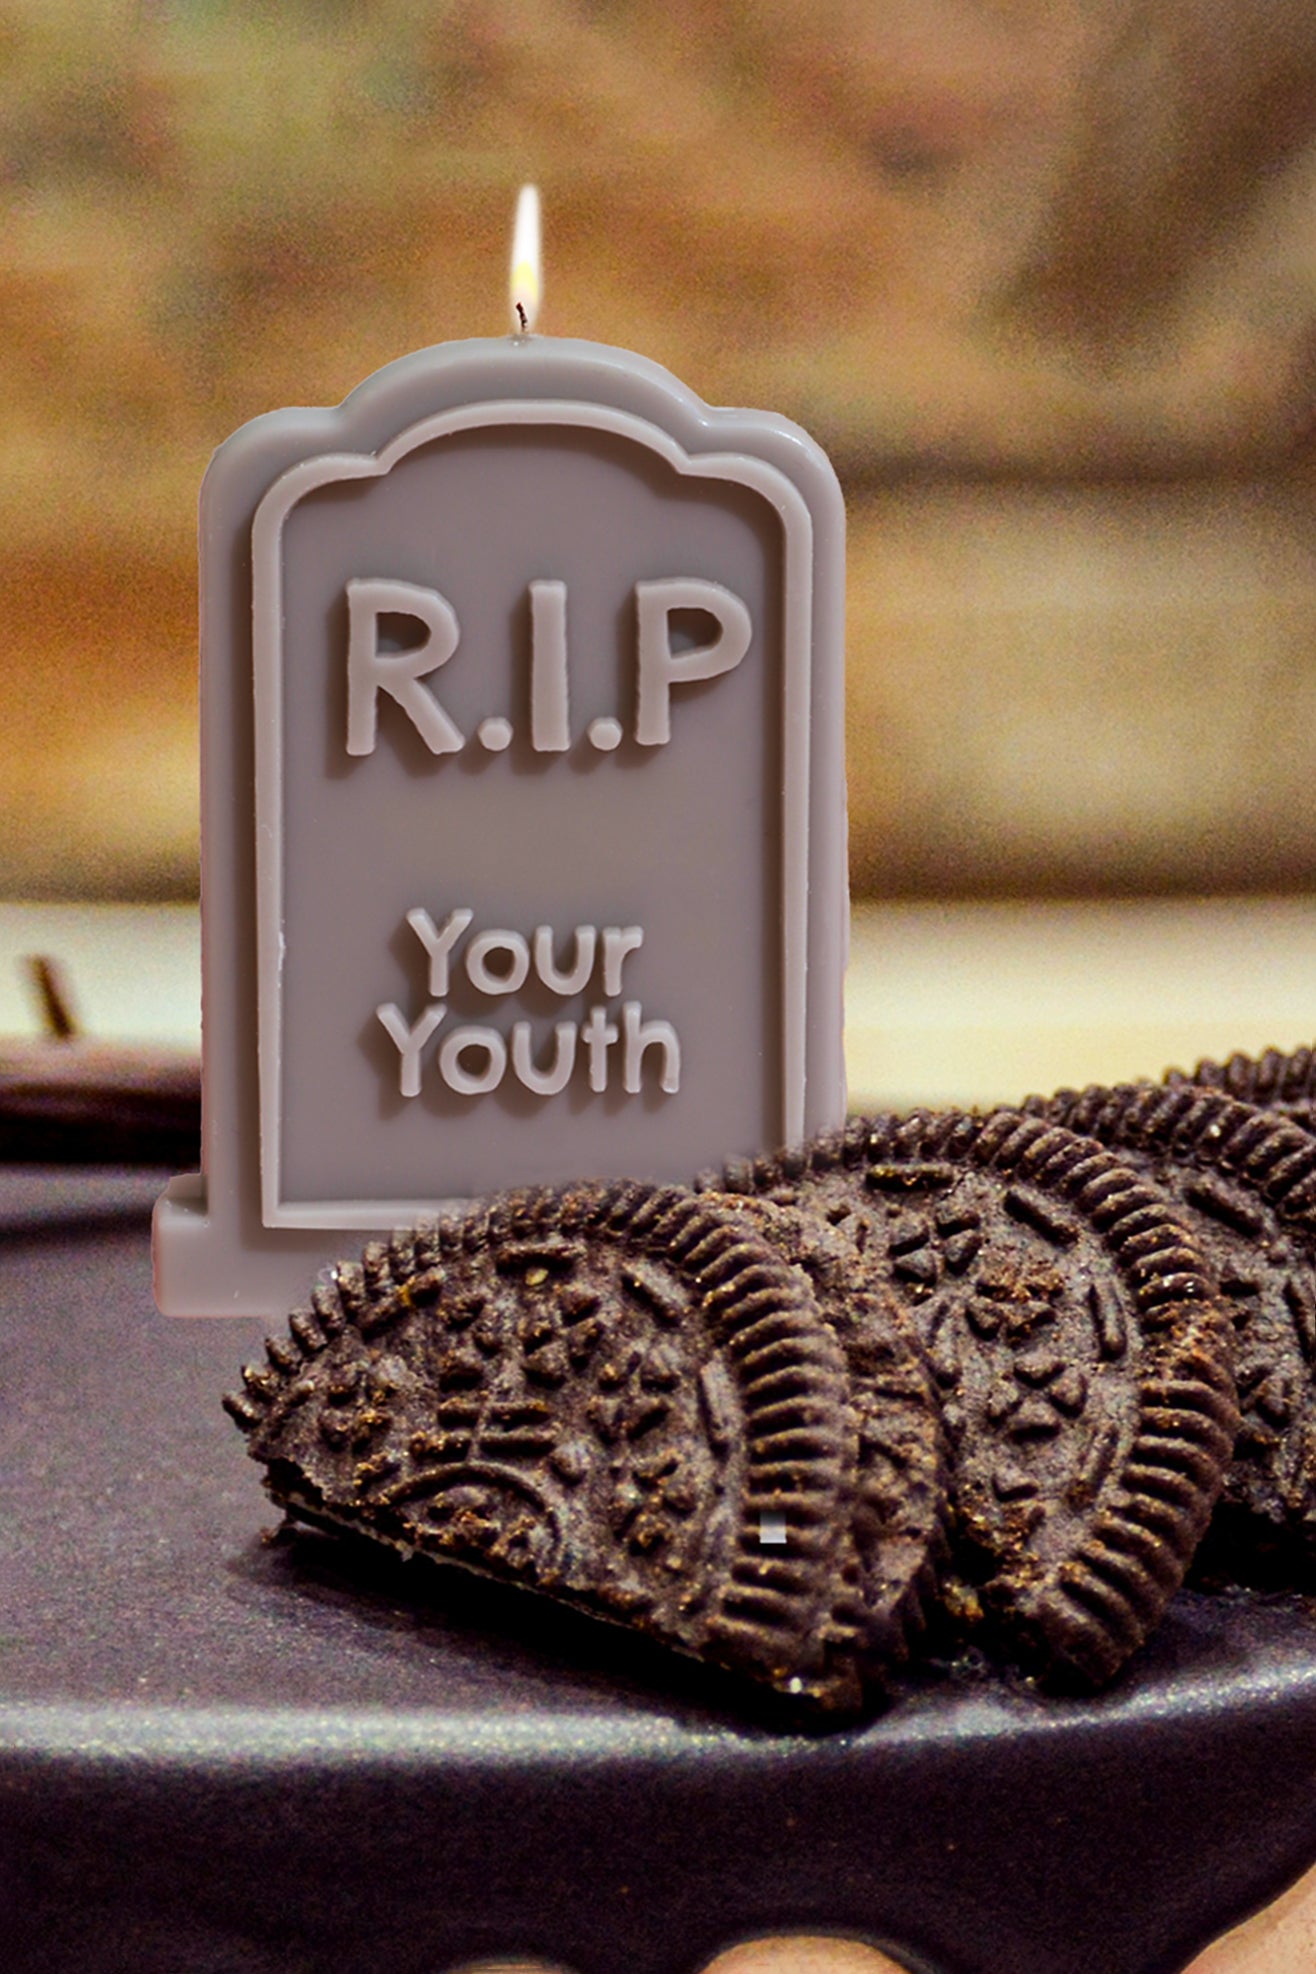 Gravestone Cake Candle with "R.I.P Your Youth"